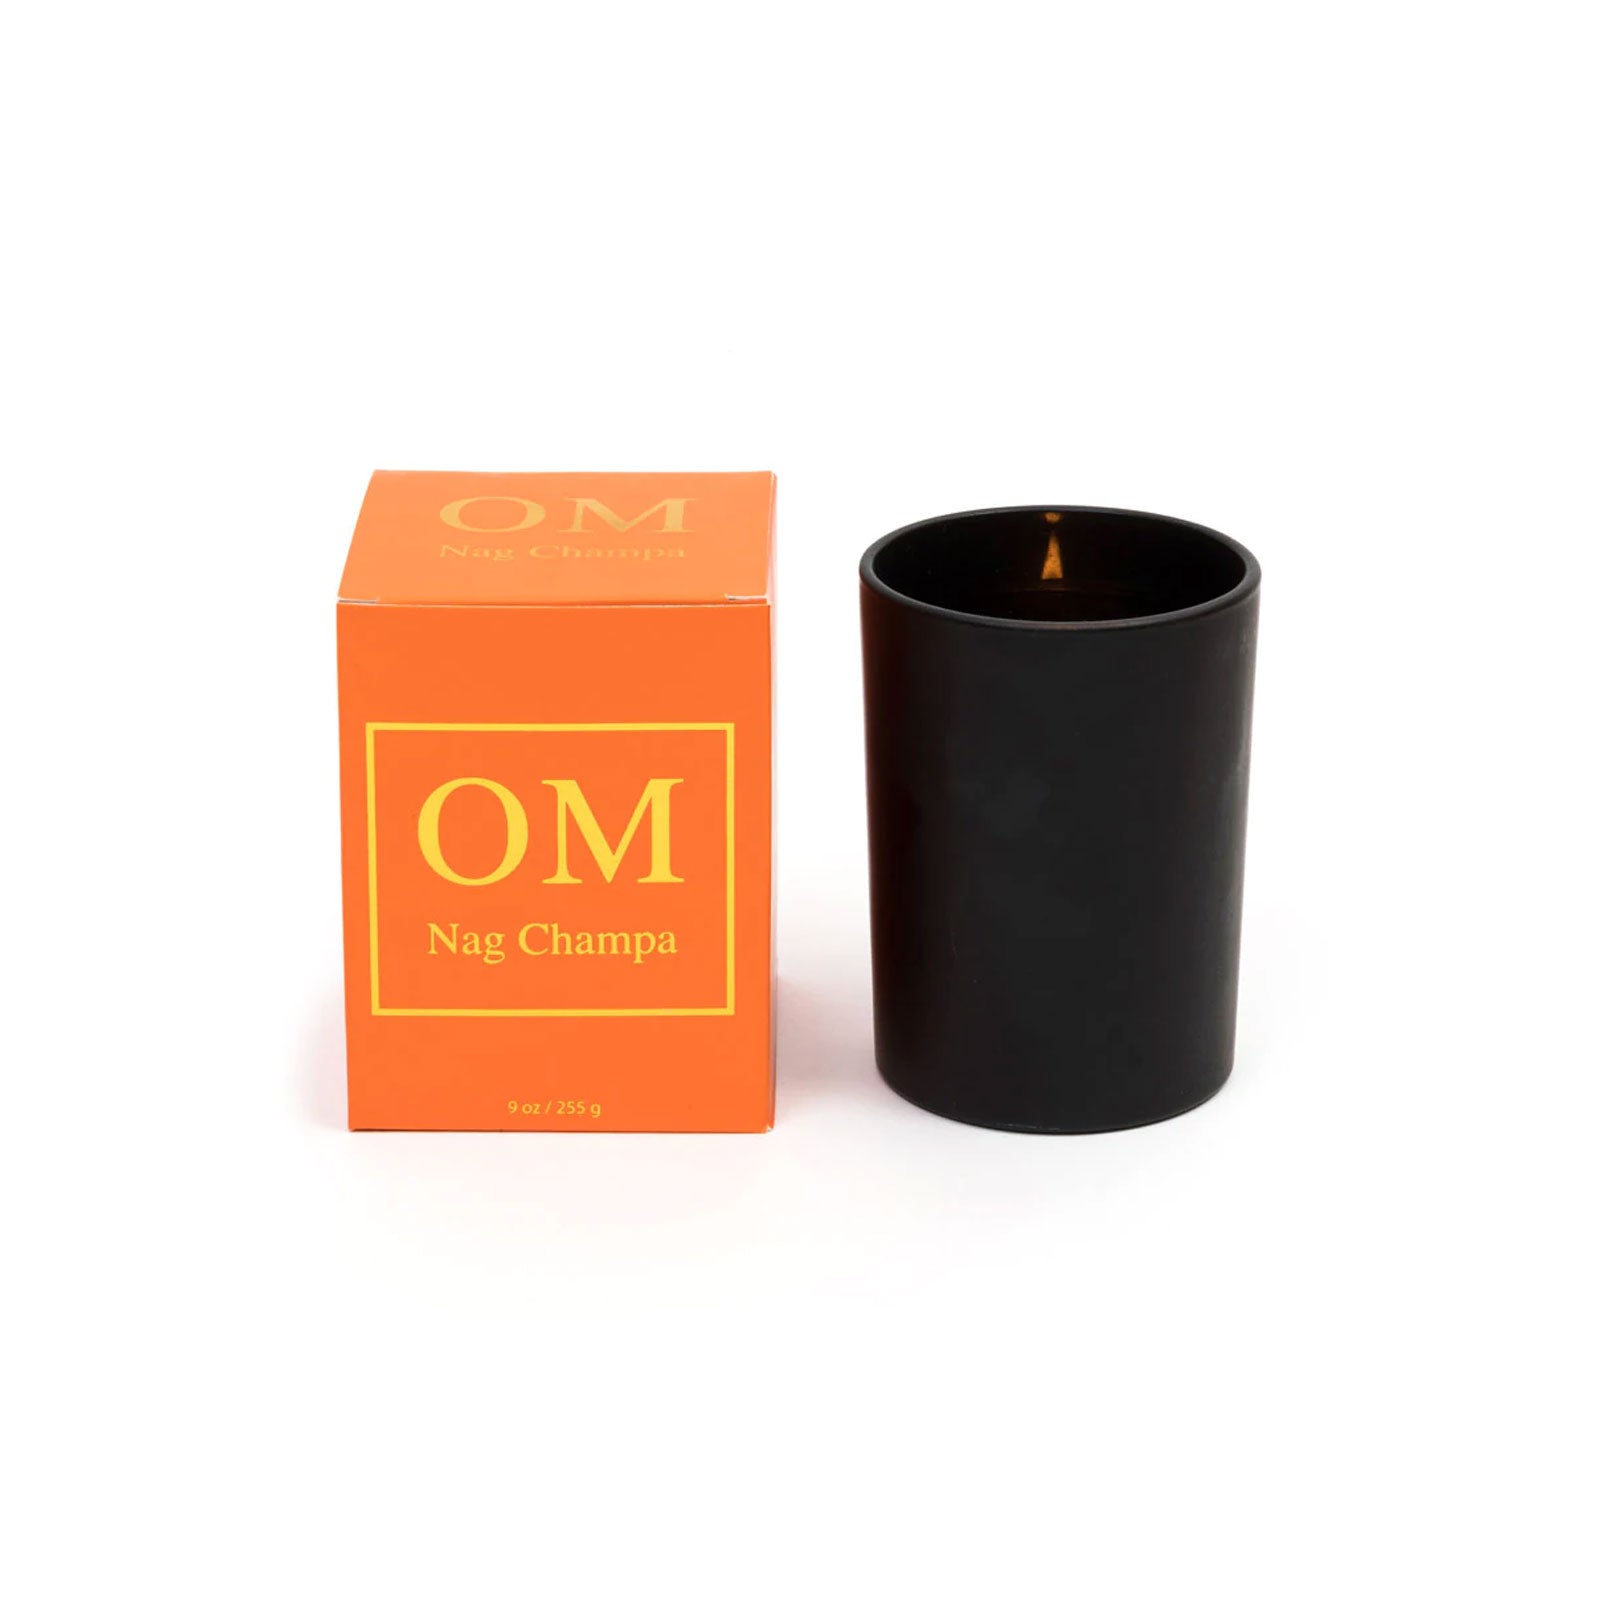 OM Soy Wax Candle, Nag Champa, Home Accents